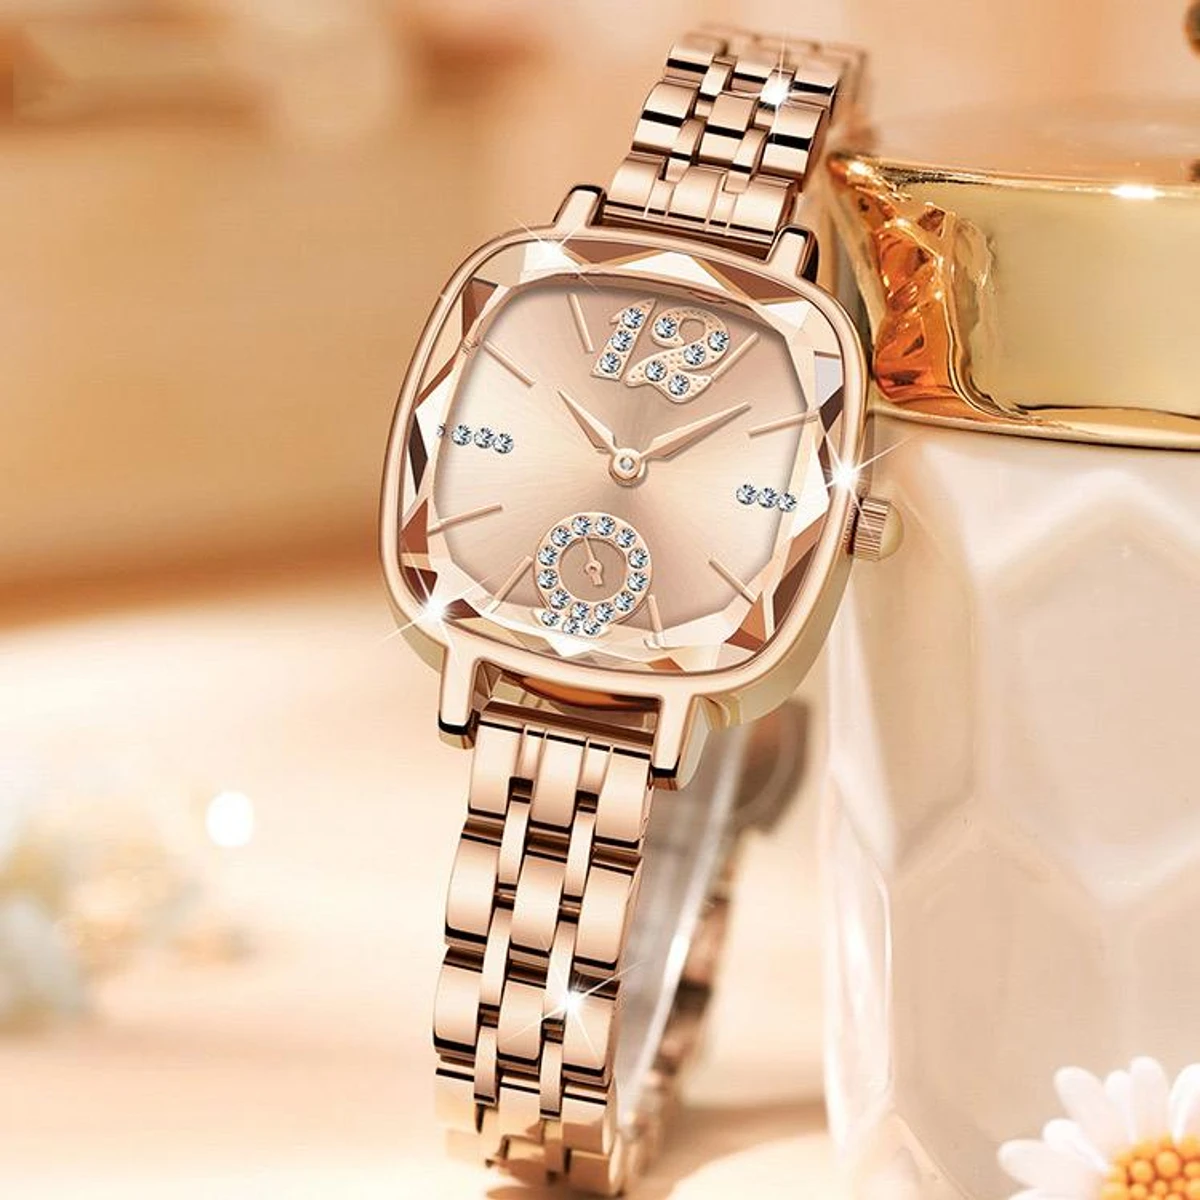 CRRJU Waterproof Ladies Wristwatch with Sparkling Rhinestone Dial and Stainless Steel Band- Light Coffee